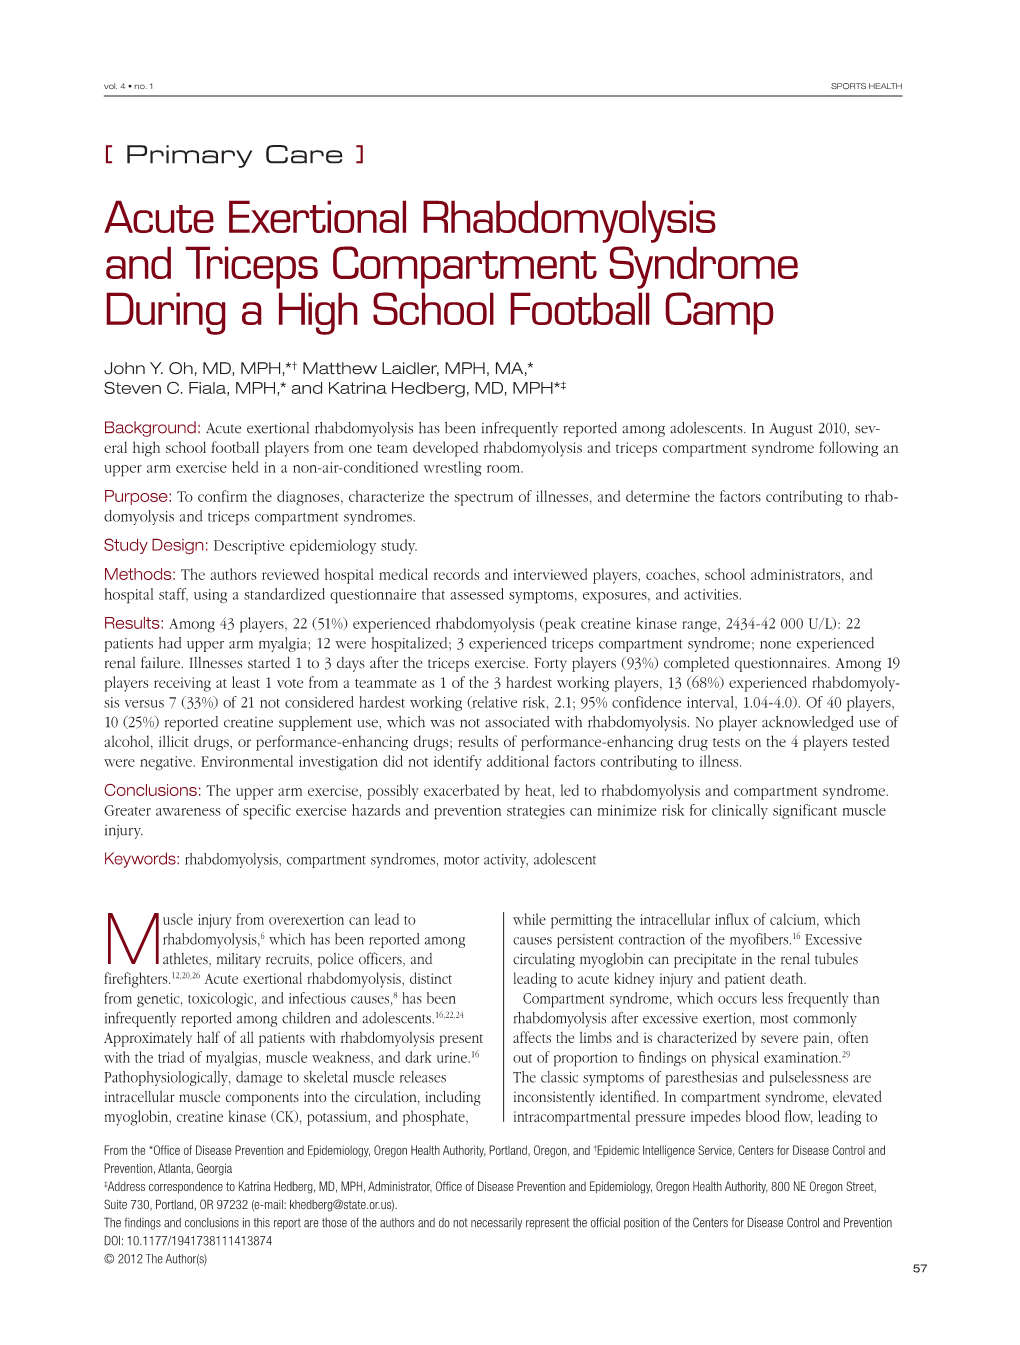 Acute Exertional Rhabdomyolysis and Triceps Compartment Syndrome During a High School Football Camp